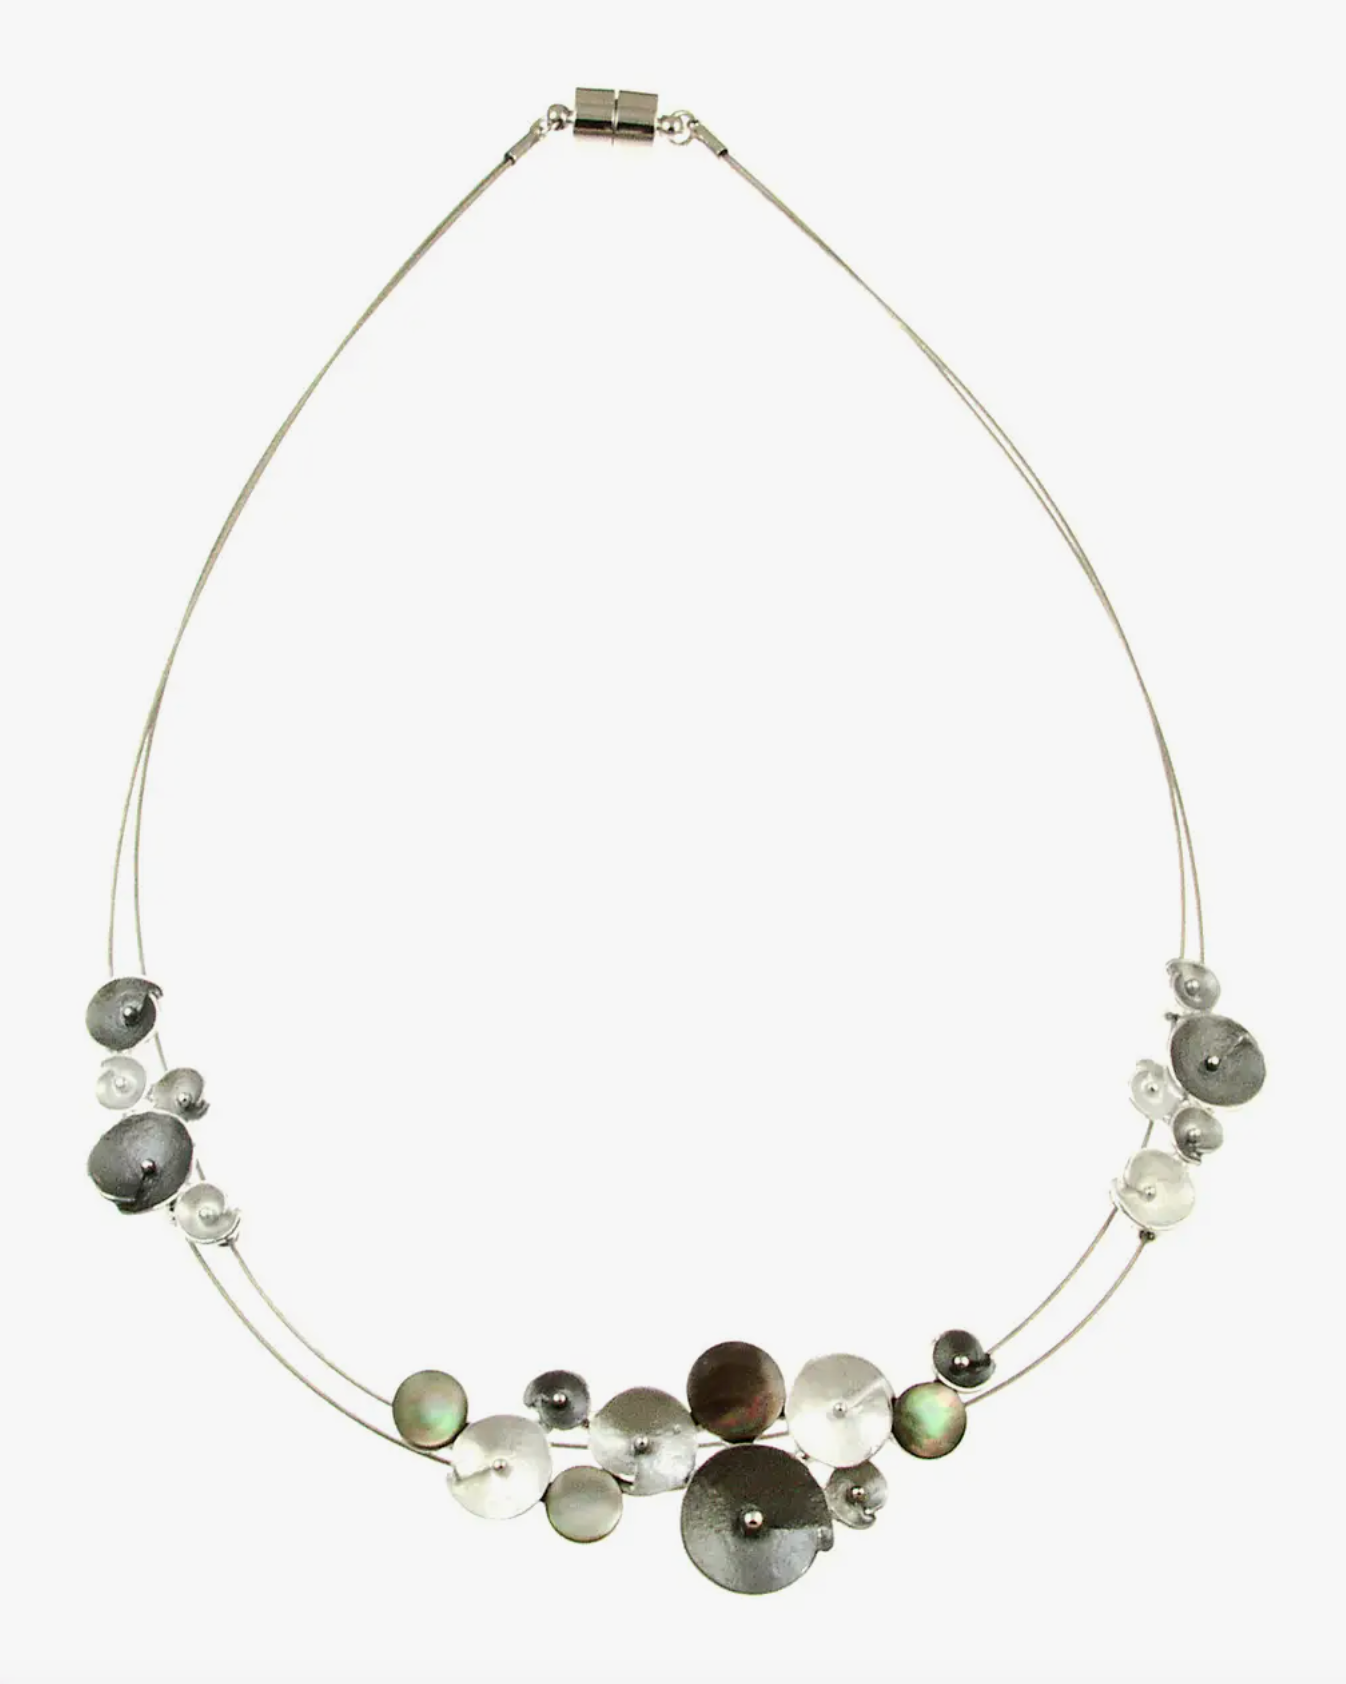 Metal Flower Necklace - Gray